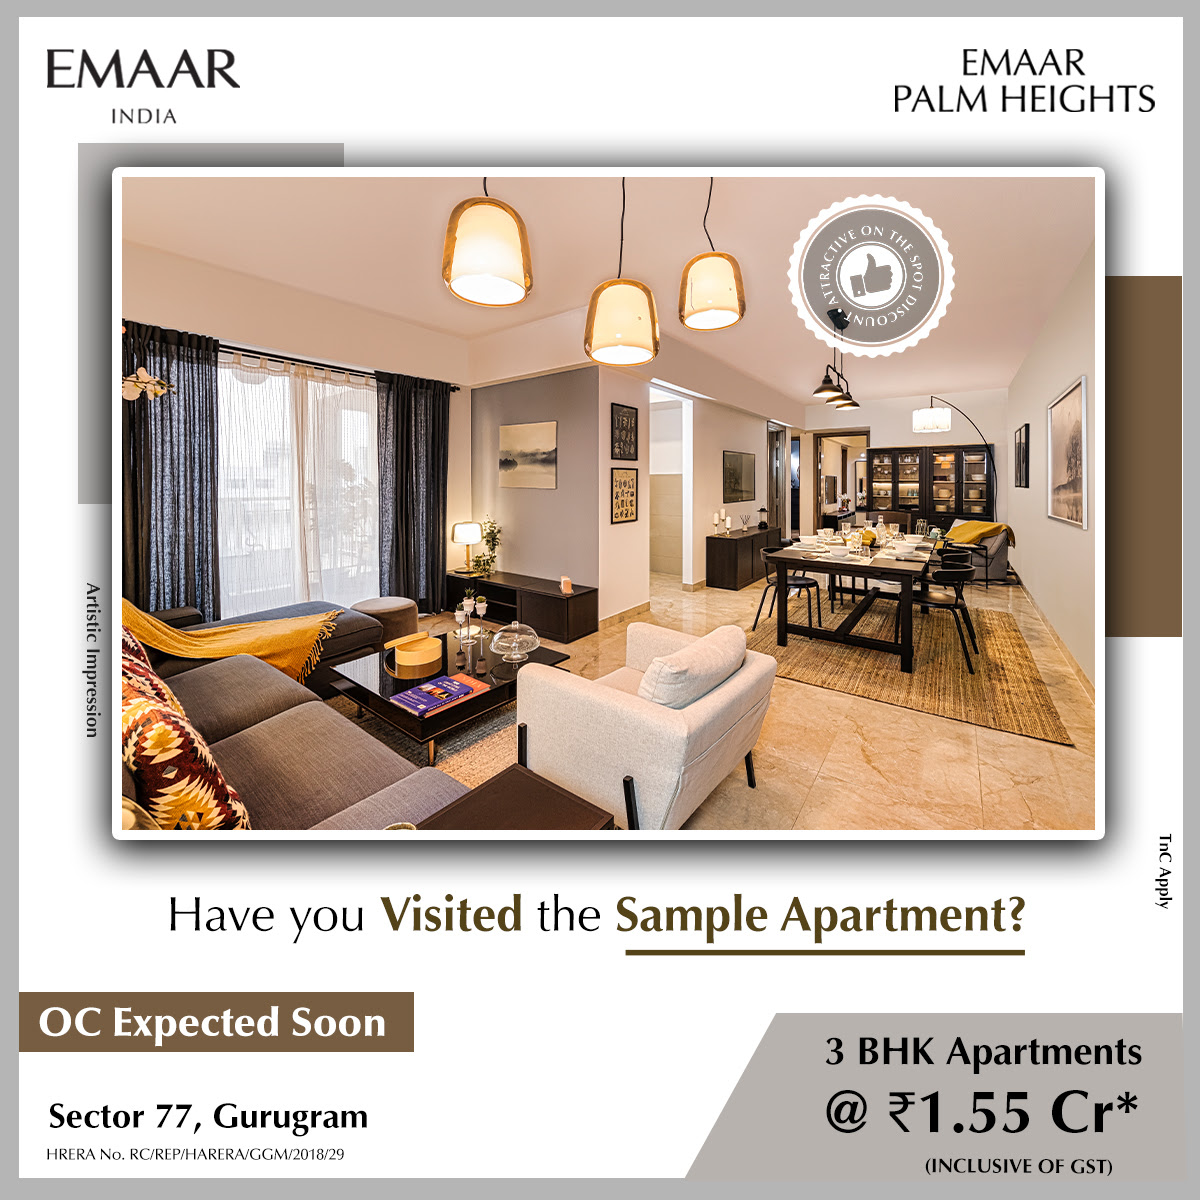 Book 3 BHK apartments Rs 1.55 Cr at Emaar Palm Heights in Sector 77, Gurgaon Update